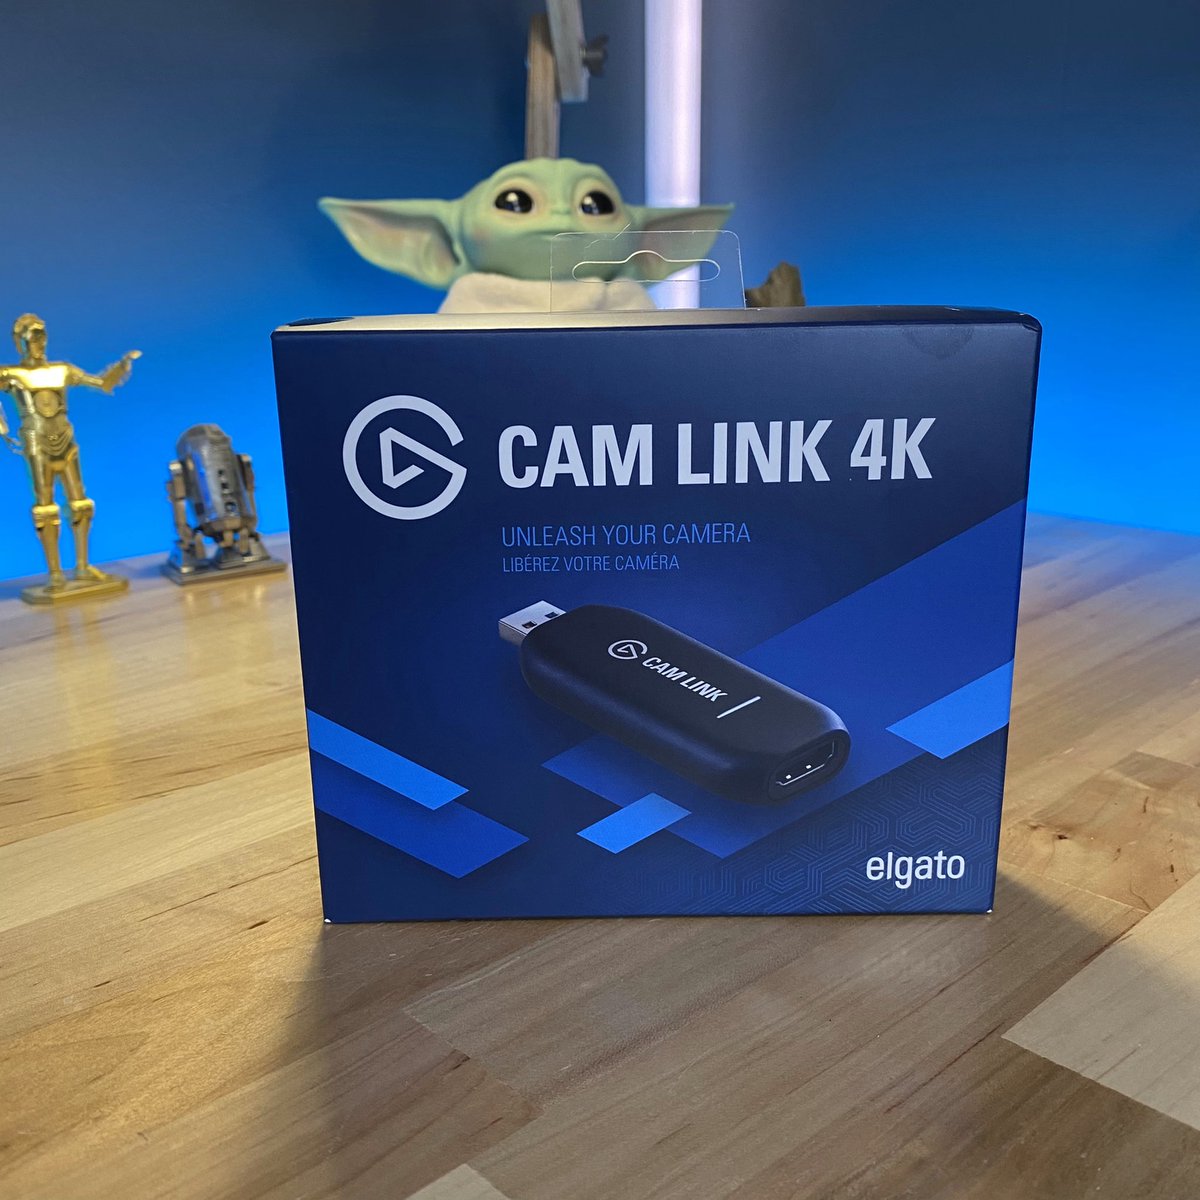 Craig Poulsen Craig S Tech Talk New Elgatogaming Cam Link 4k Came In Today If You Livestream You Know How Hard These Are To Get Since Corona Virus Forced People